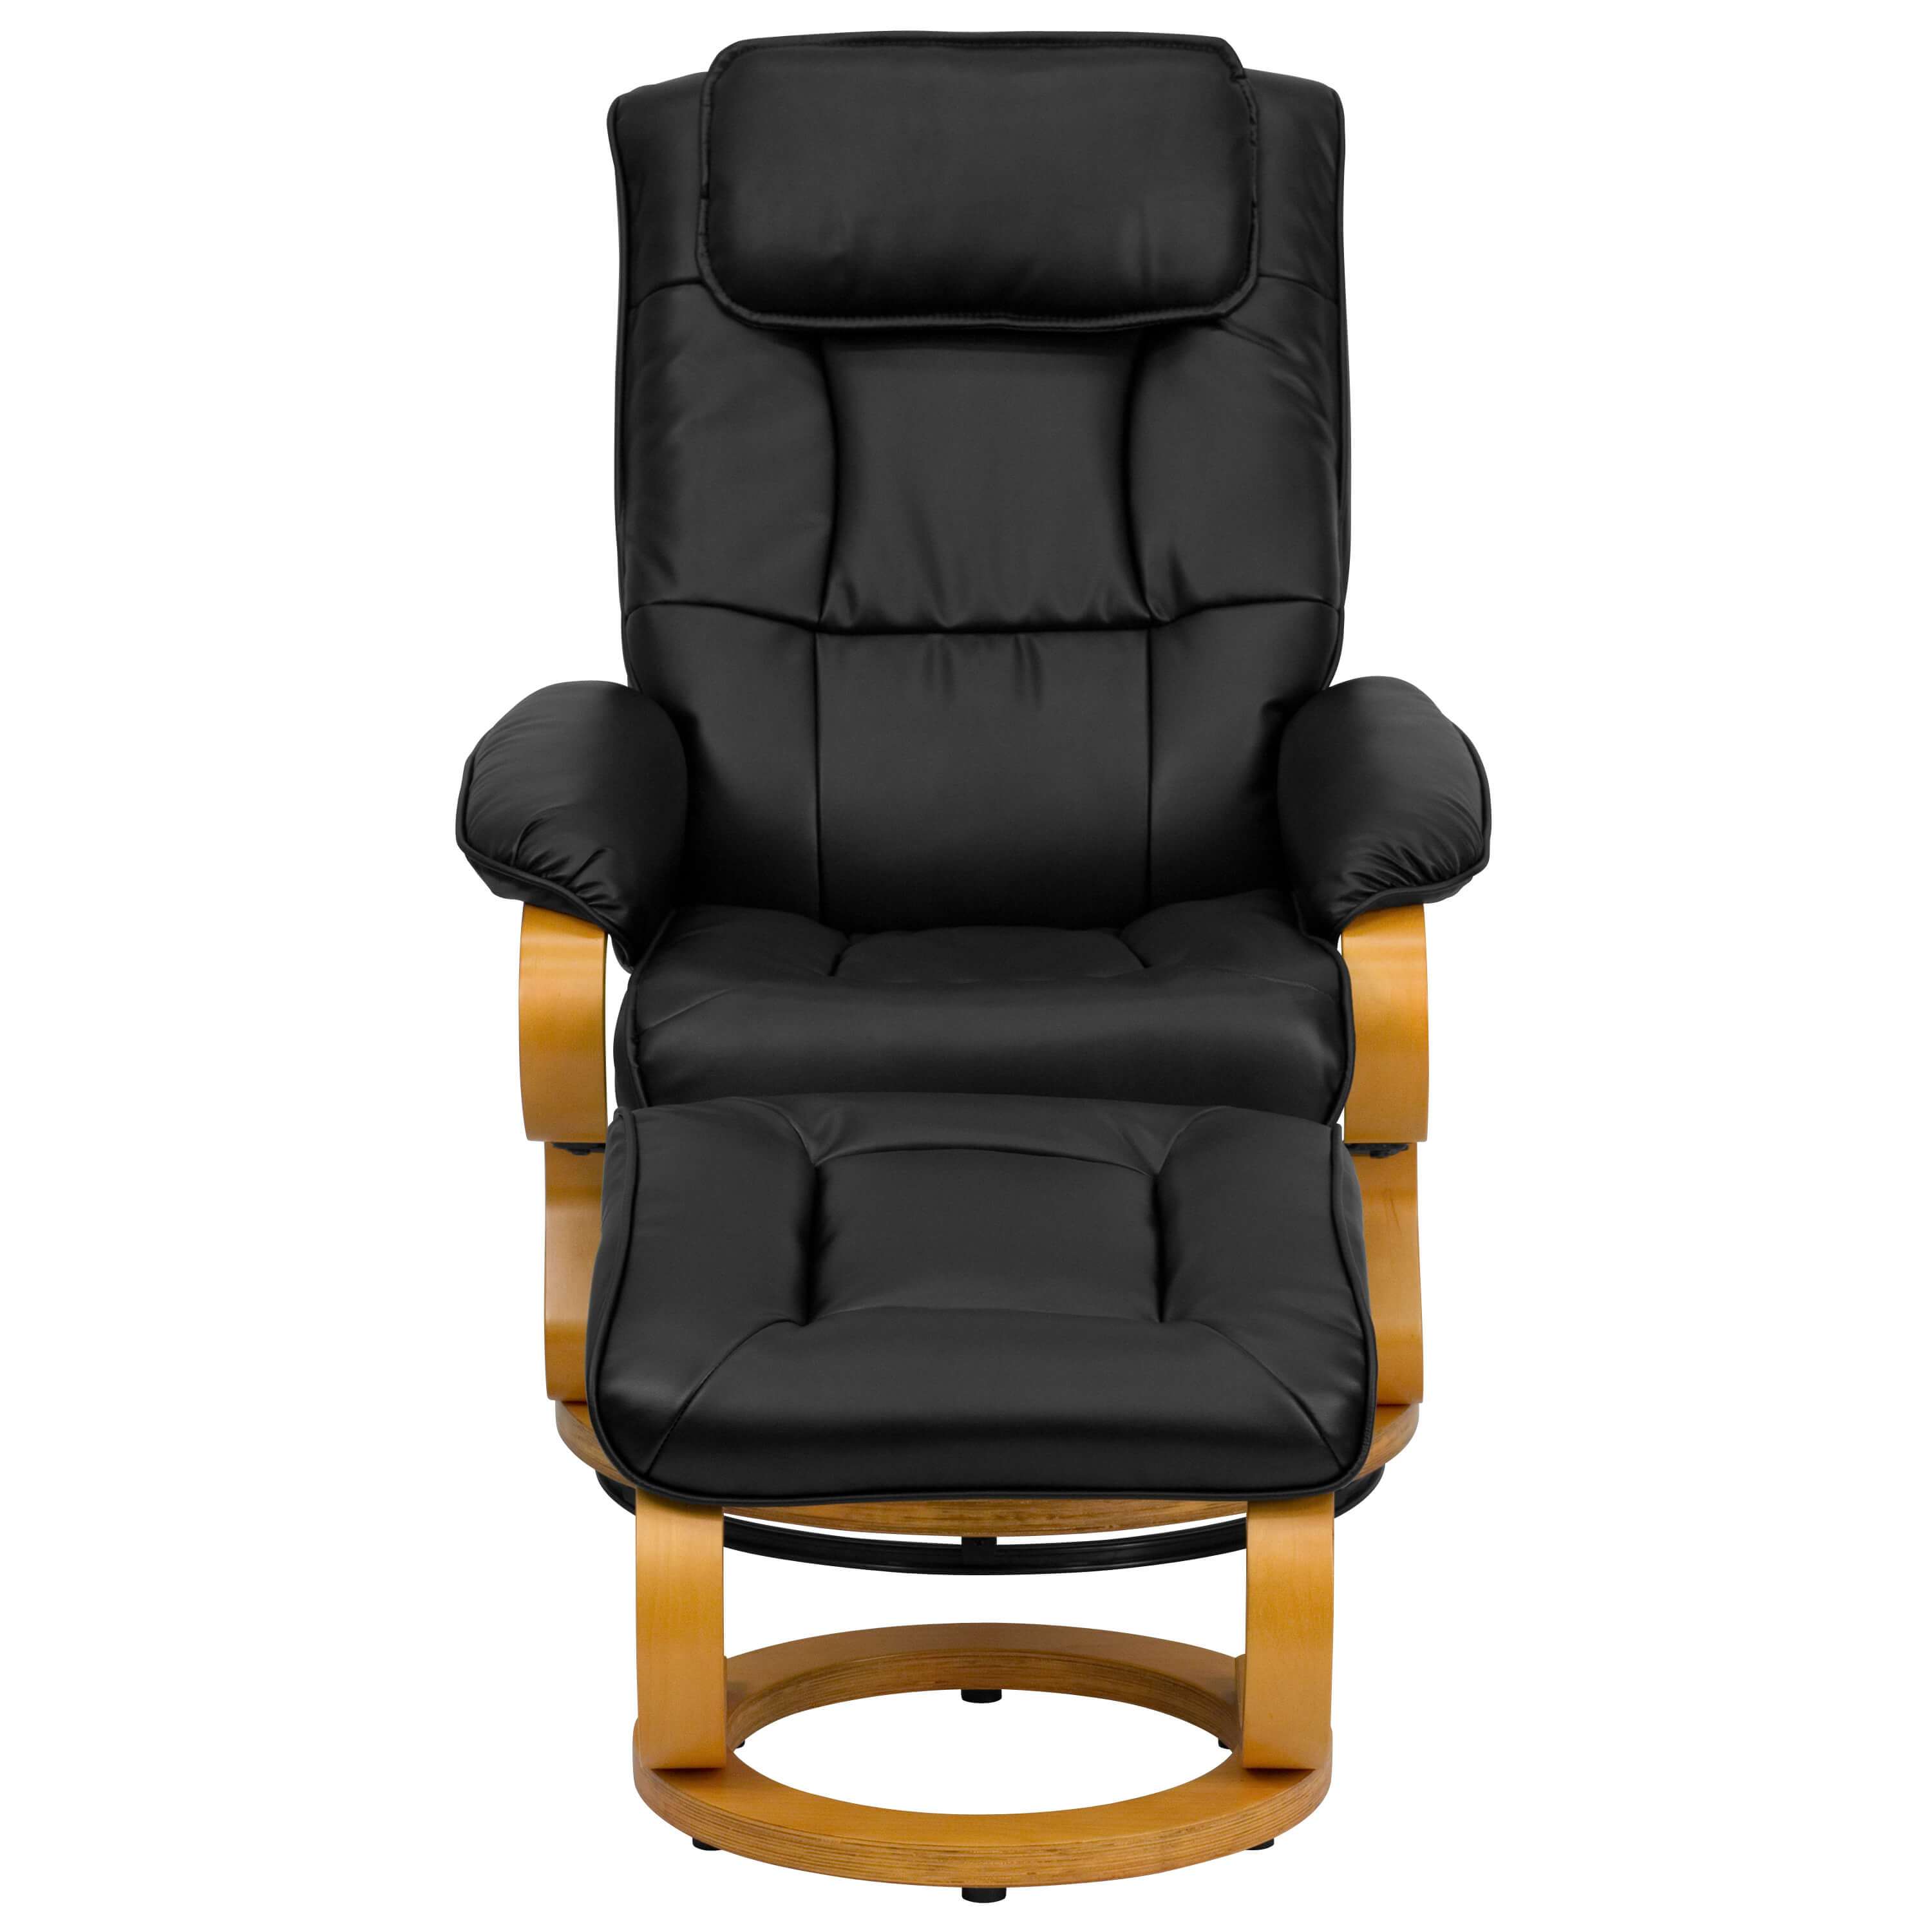 High back recliner chair front view